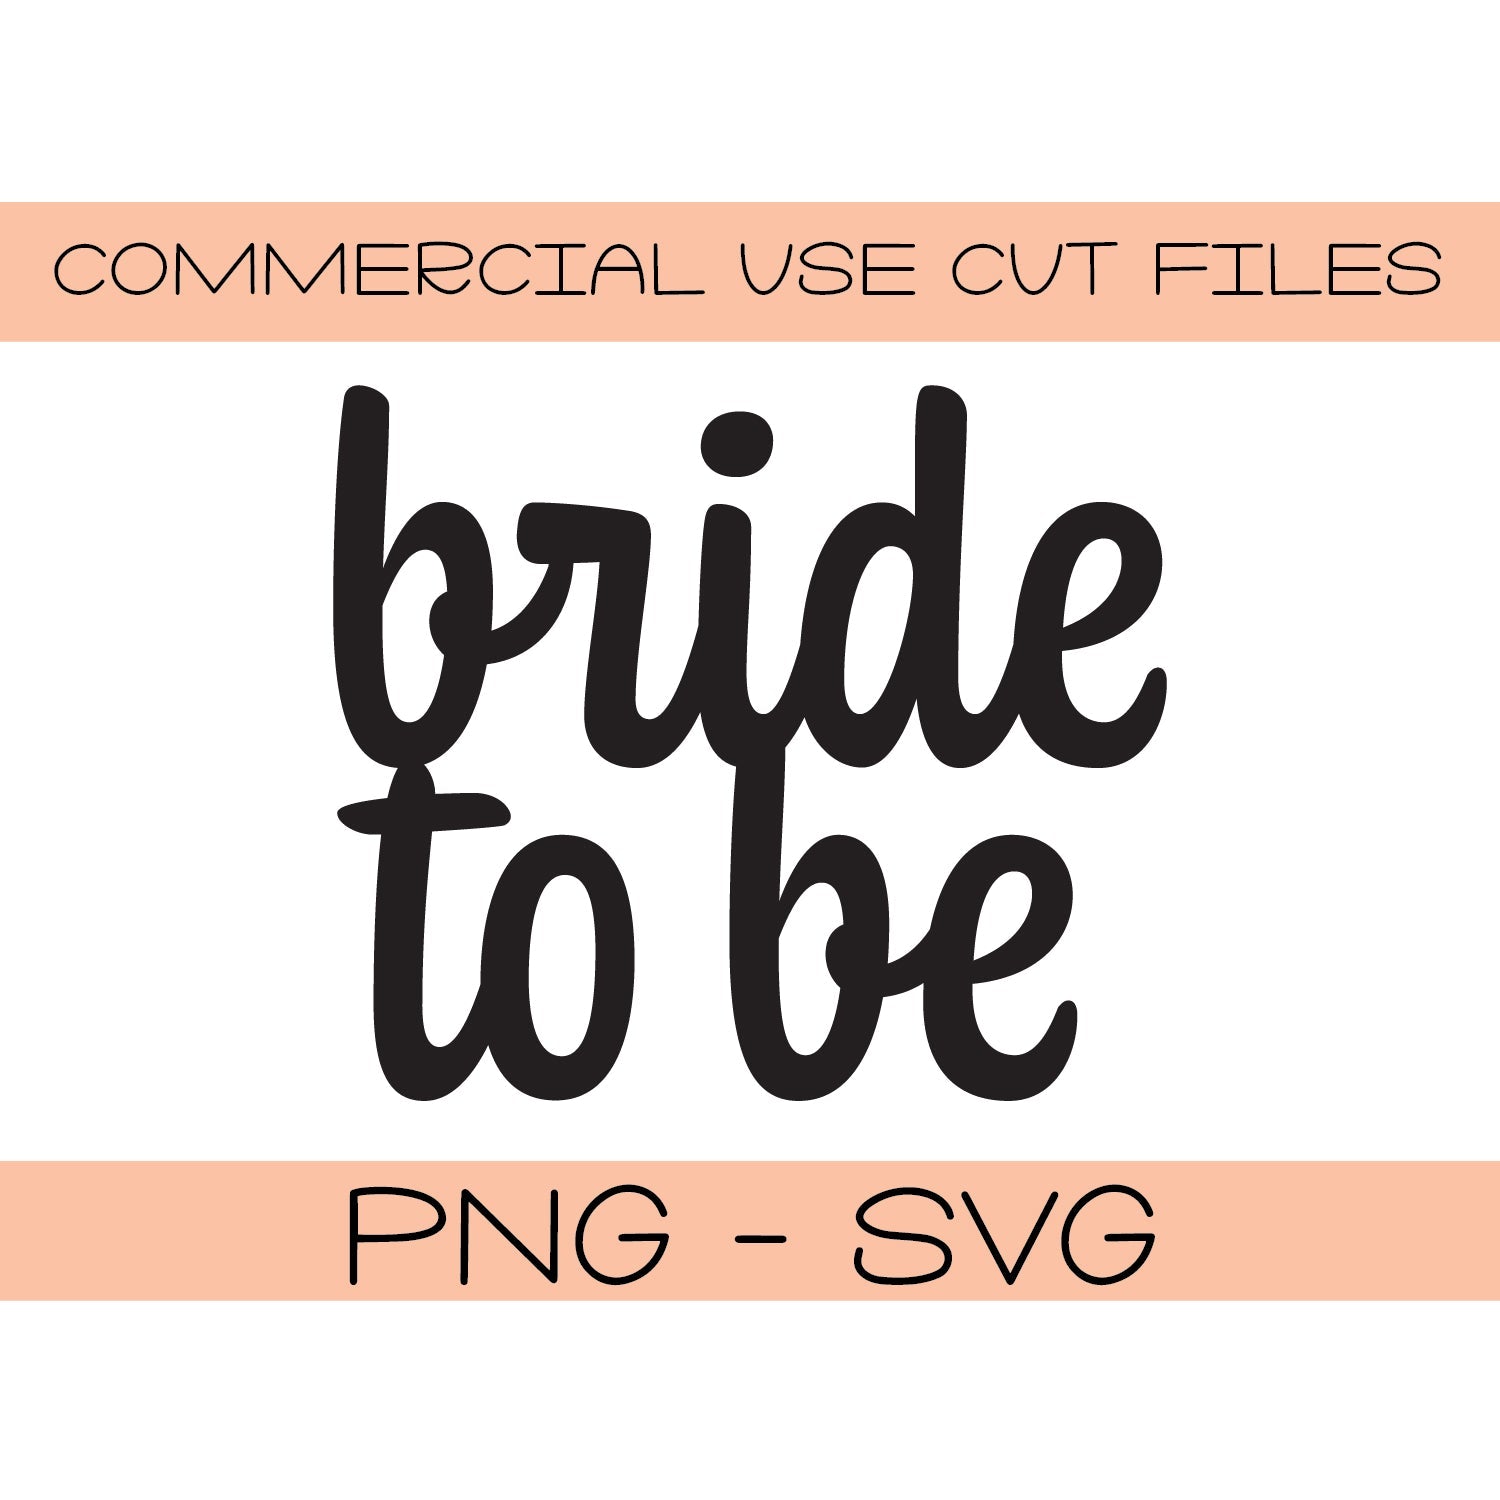 Bride To Be SVG, Bride SVG, Wedding svg, Bride Cut File Cricut, Silhouette,  Bride to Be Iron on transfer, Svg, Png, Dxf, Jpg, Dxf